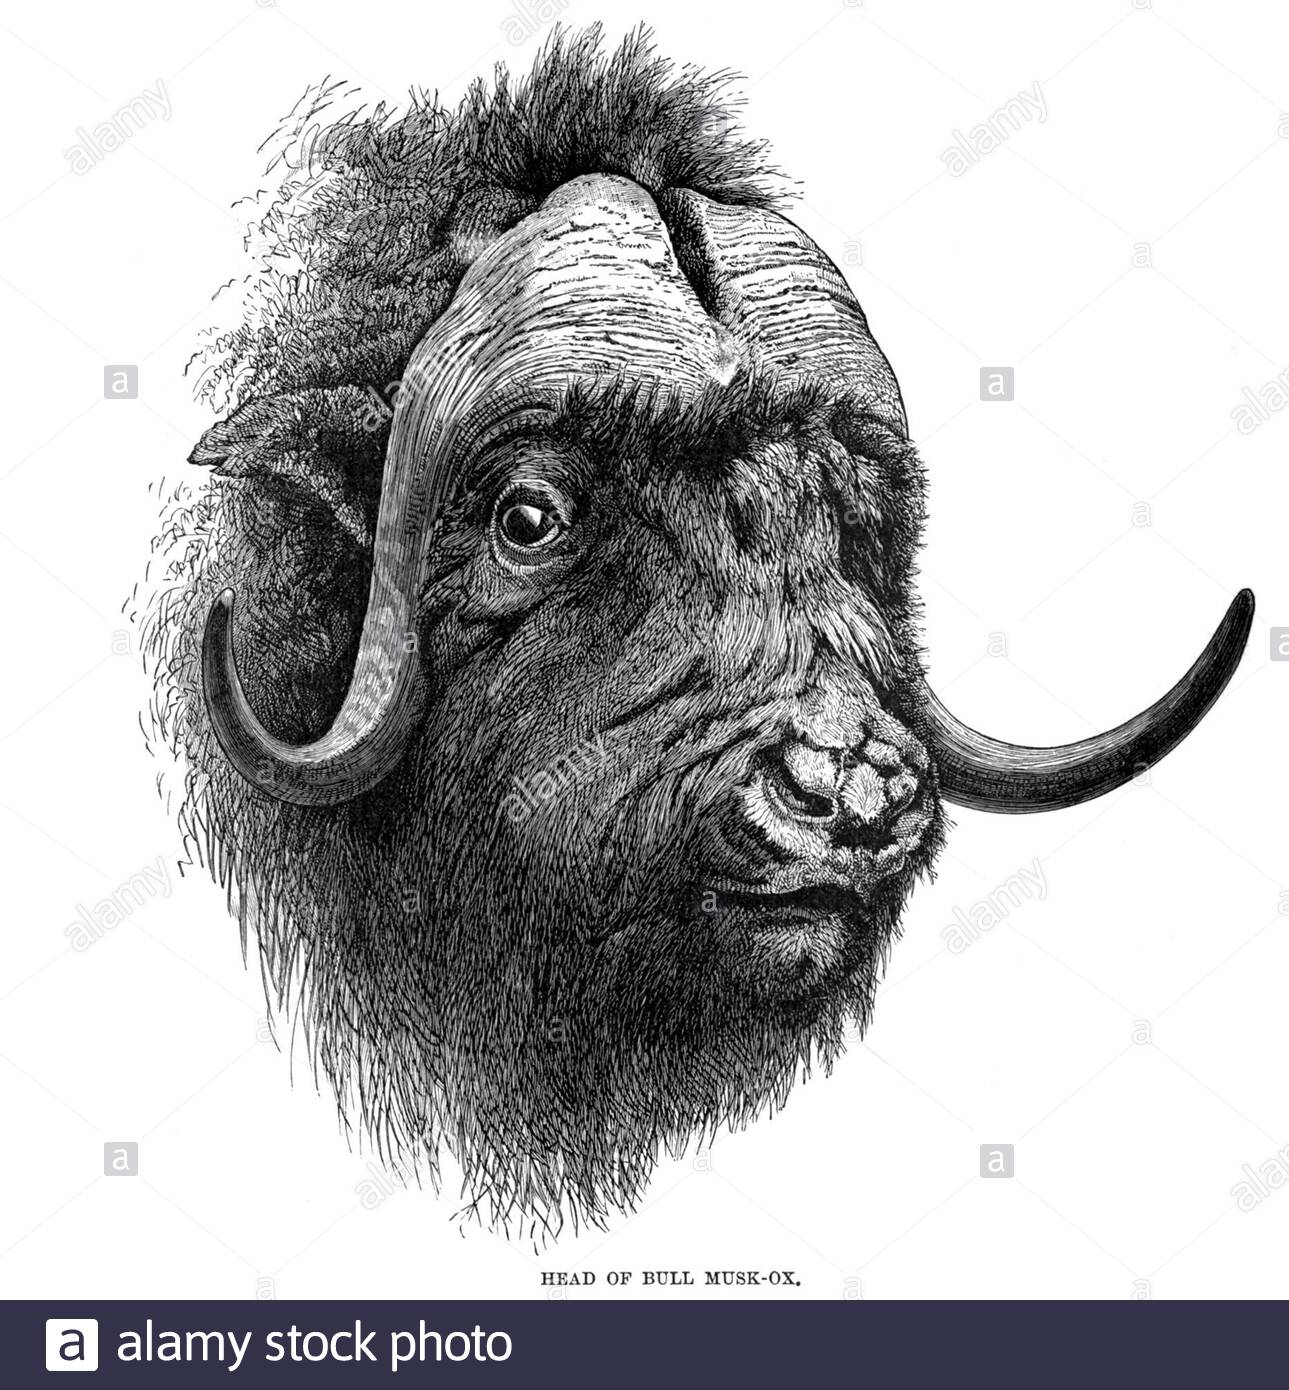 Bull Musk Ox, vintage illustration from 1894 Stock Photo